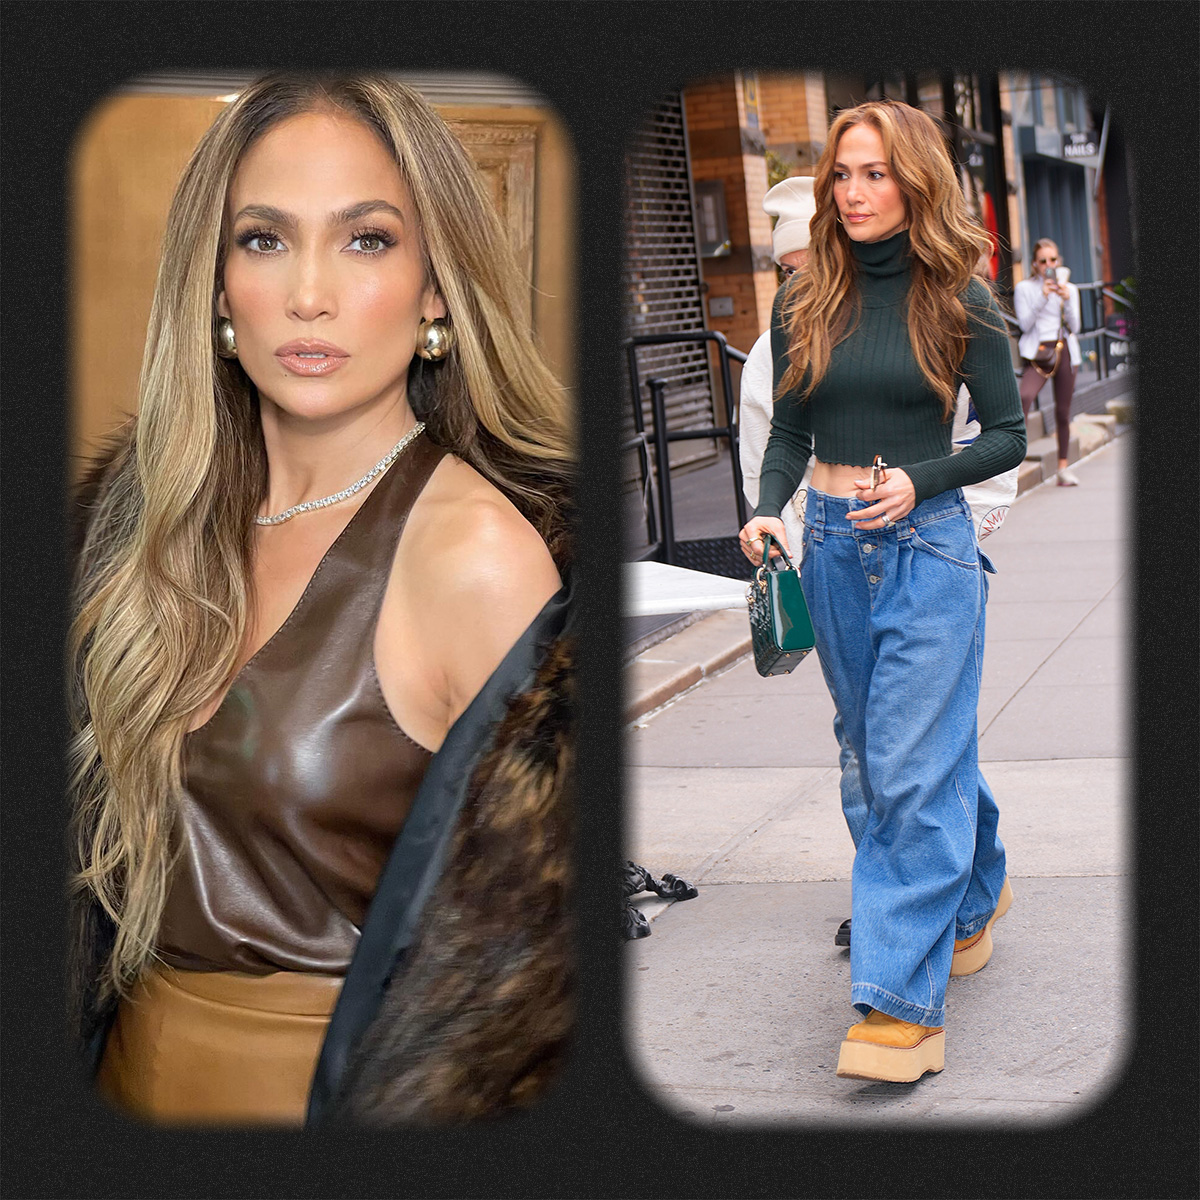 Jennifer Lopez in a leather top; Jennifer Lopez in jeans and cropped sweater